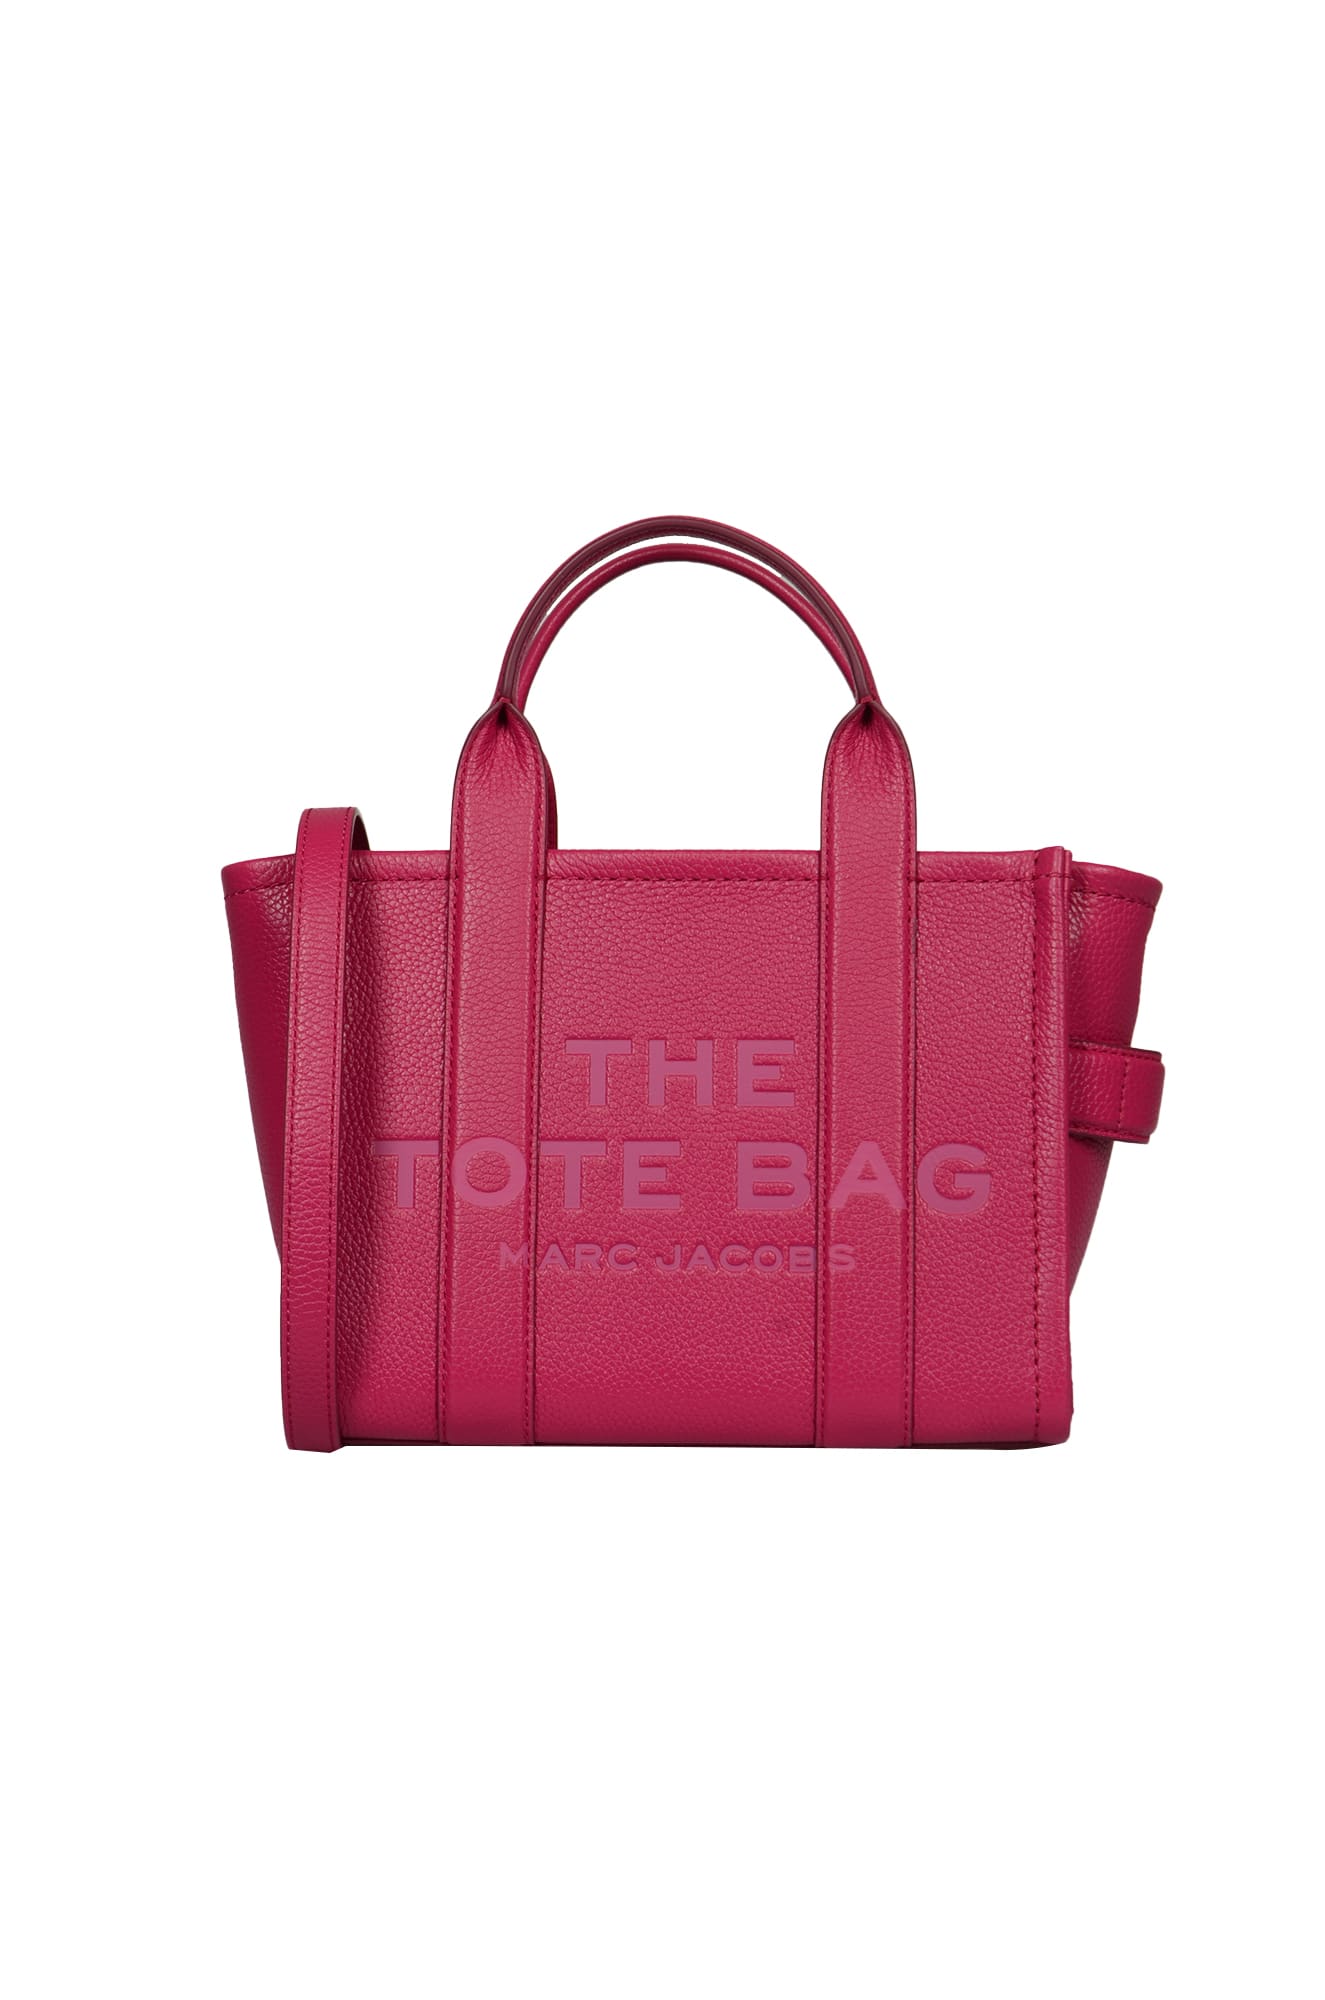 Shop Marc Jacobs The Tote Bag Tote In Lipstick Pink